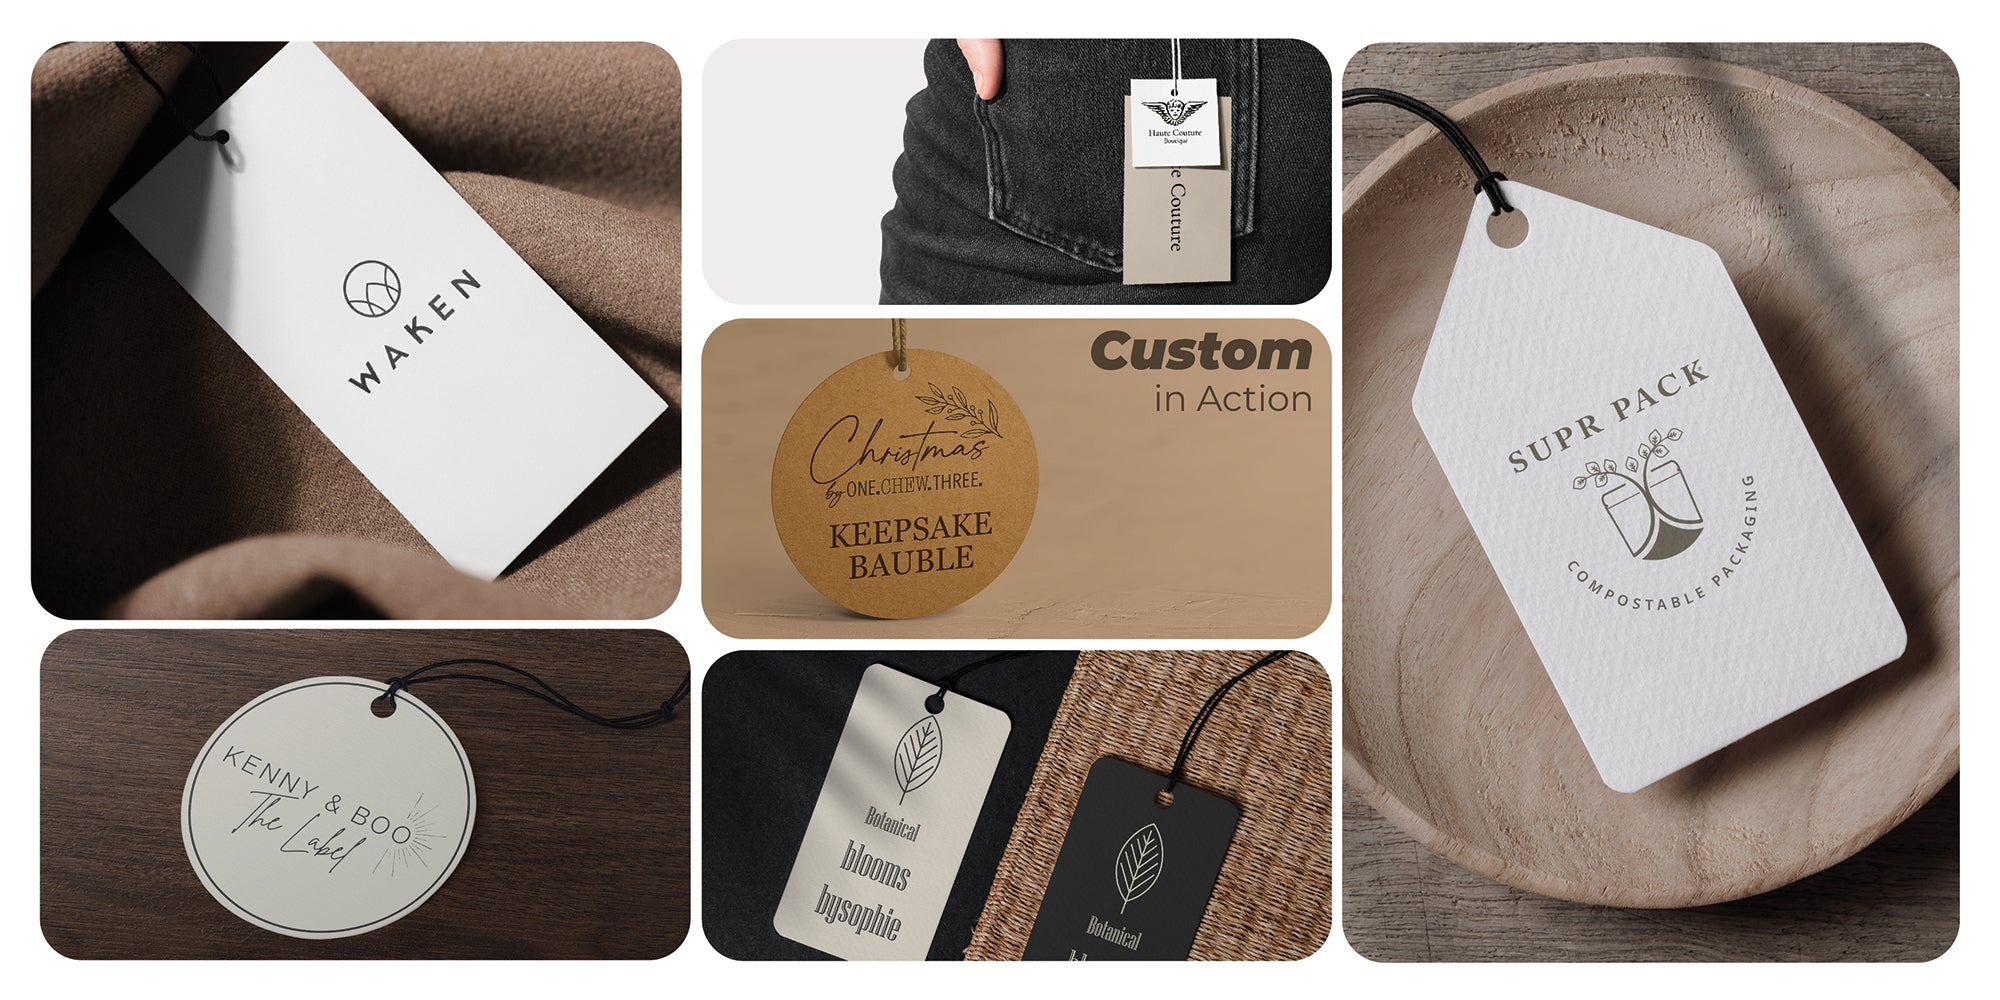 Tags | Swing Tag | Earring Tag | Tags in Australia | Eco-Friendly Packaging | Sustainable Product